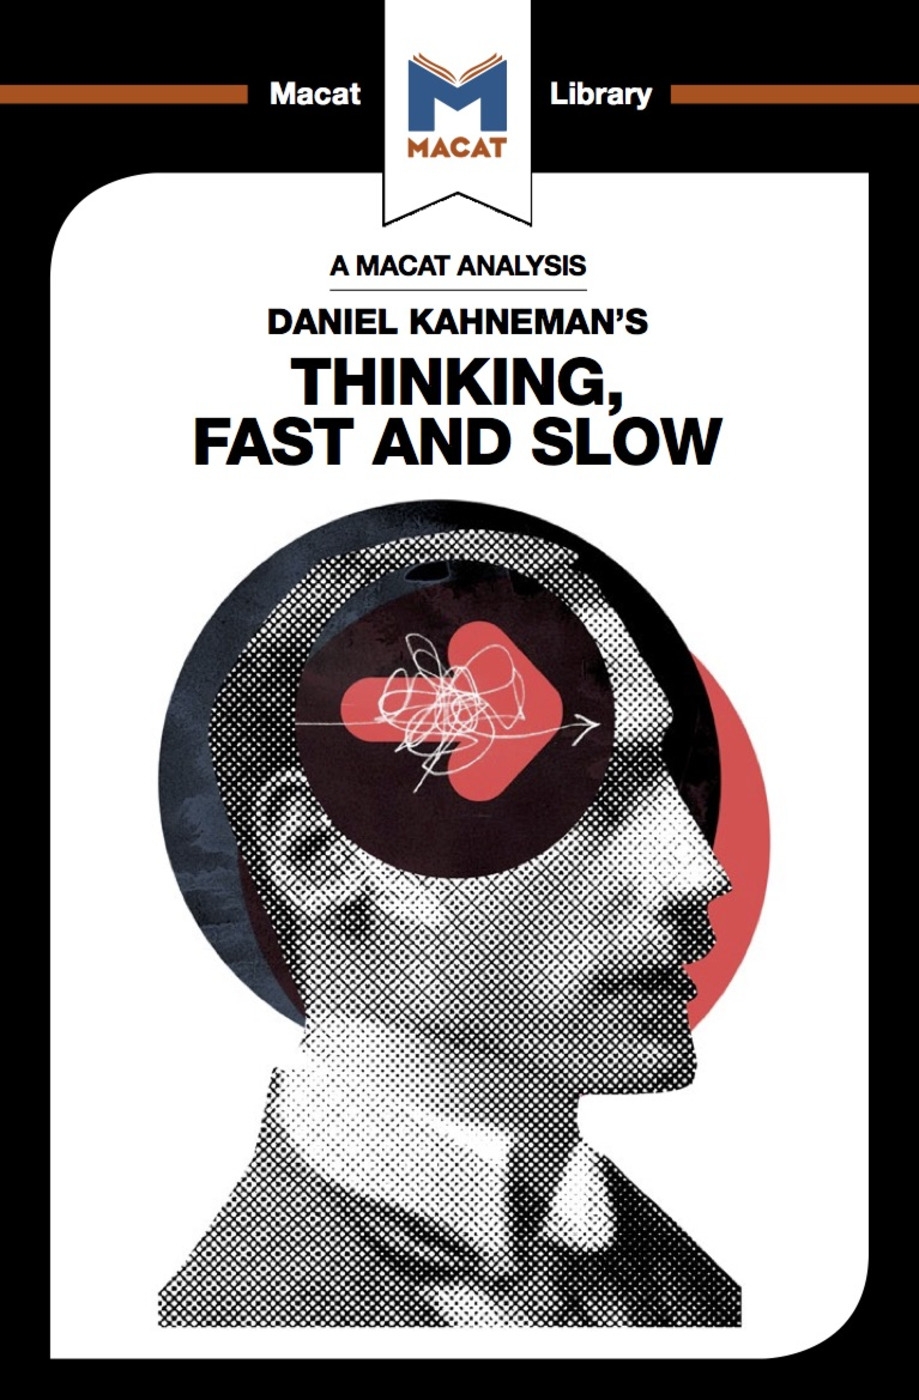 An Analysis of Daniel Kahneman’s Thinking, Fast and Slow